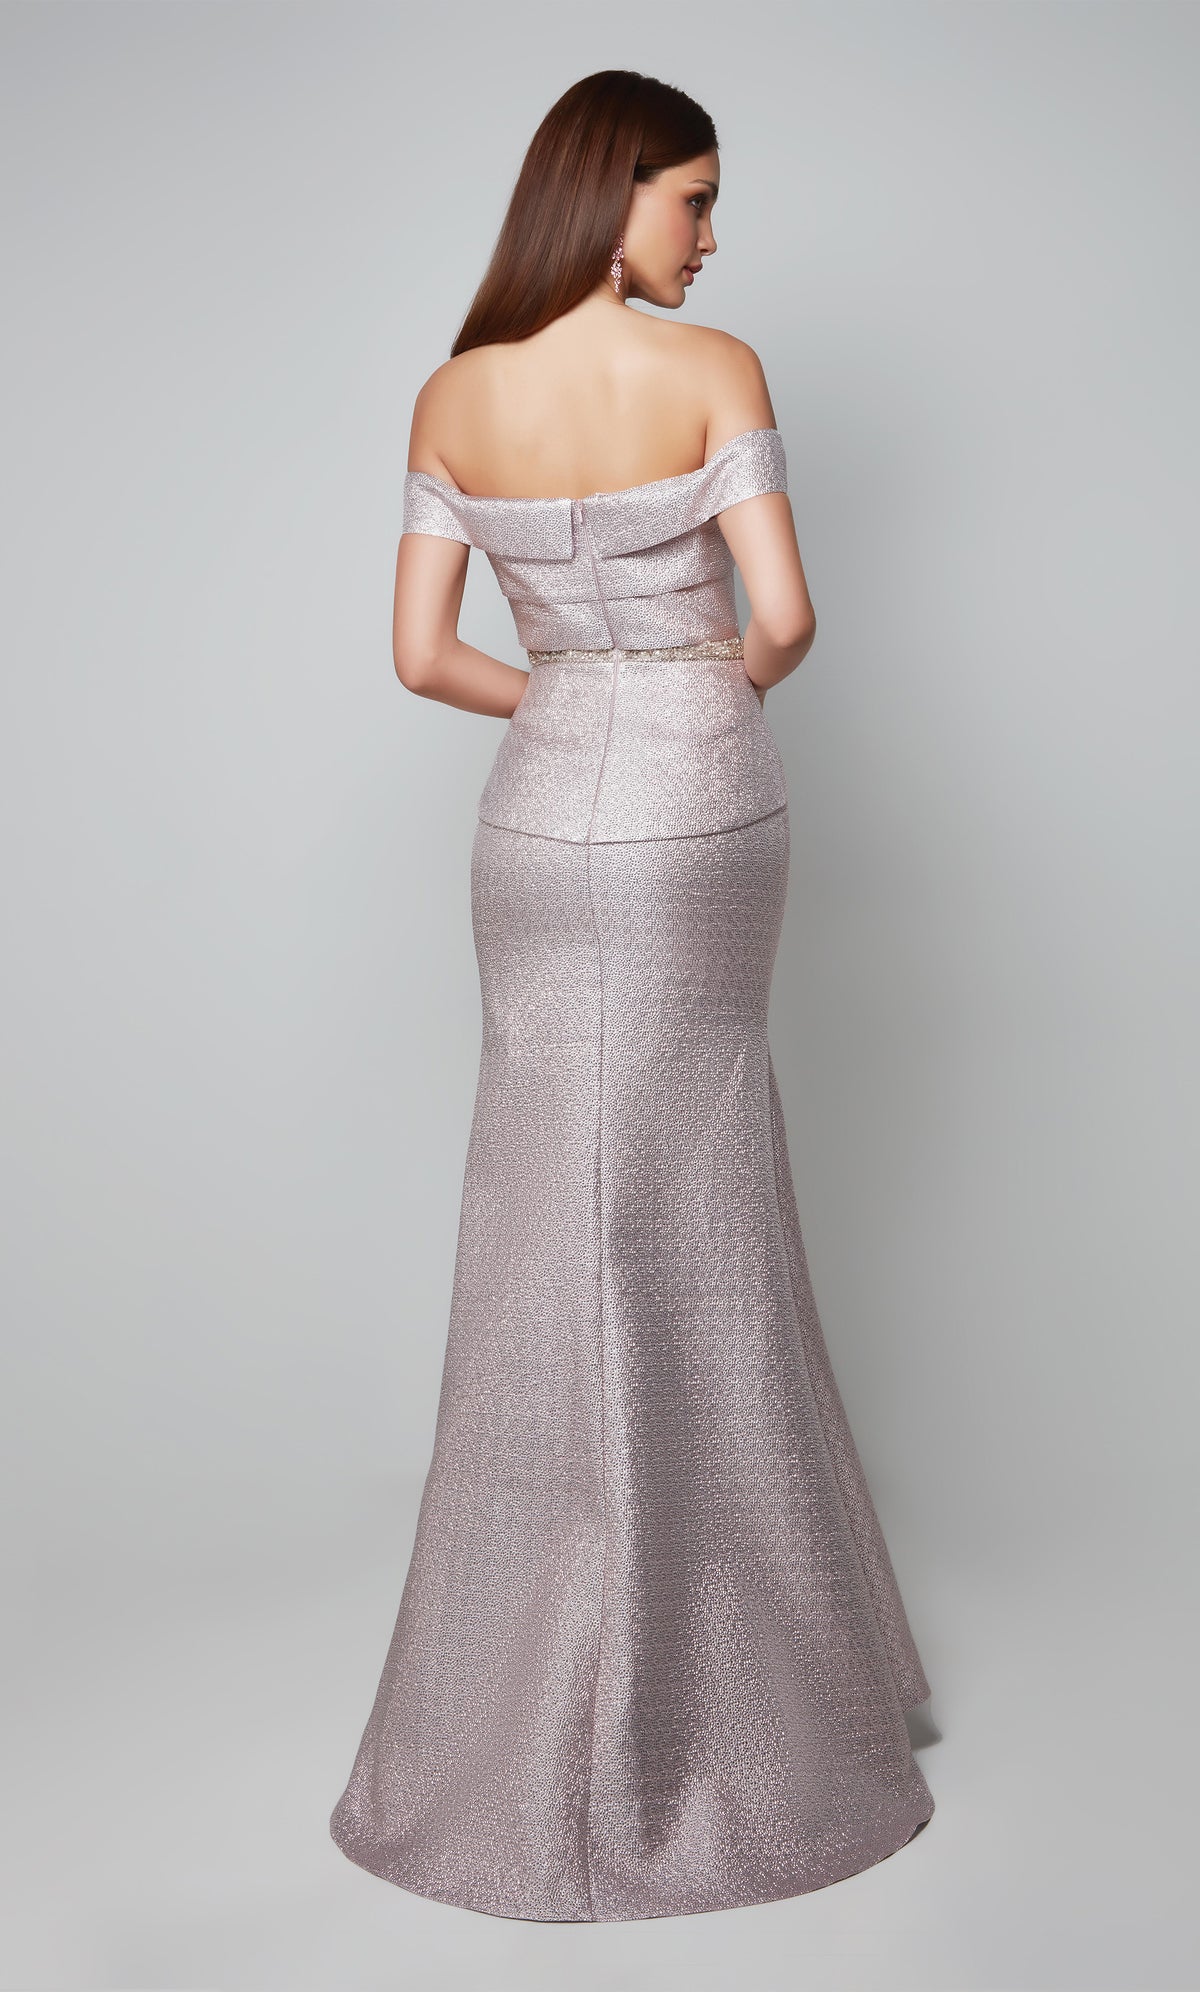 Light pink metallic off the shoulder dress with a beaded waist and train.